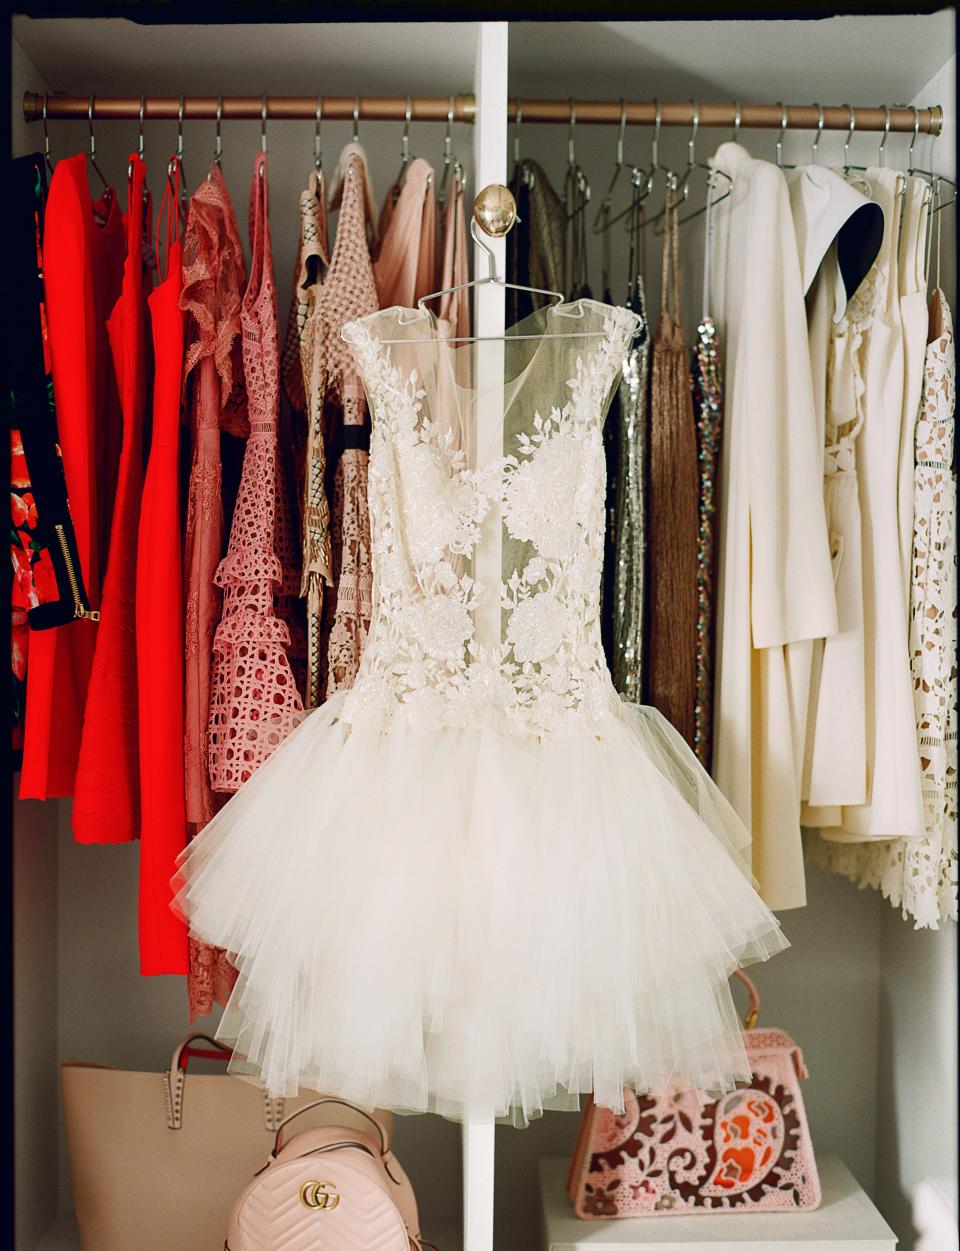 The Reem Acra dress Copeland wore at her wedding reception in 2016 hangs in the dressing room.